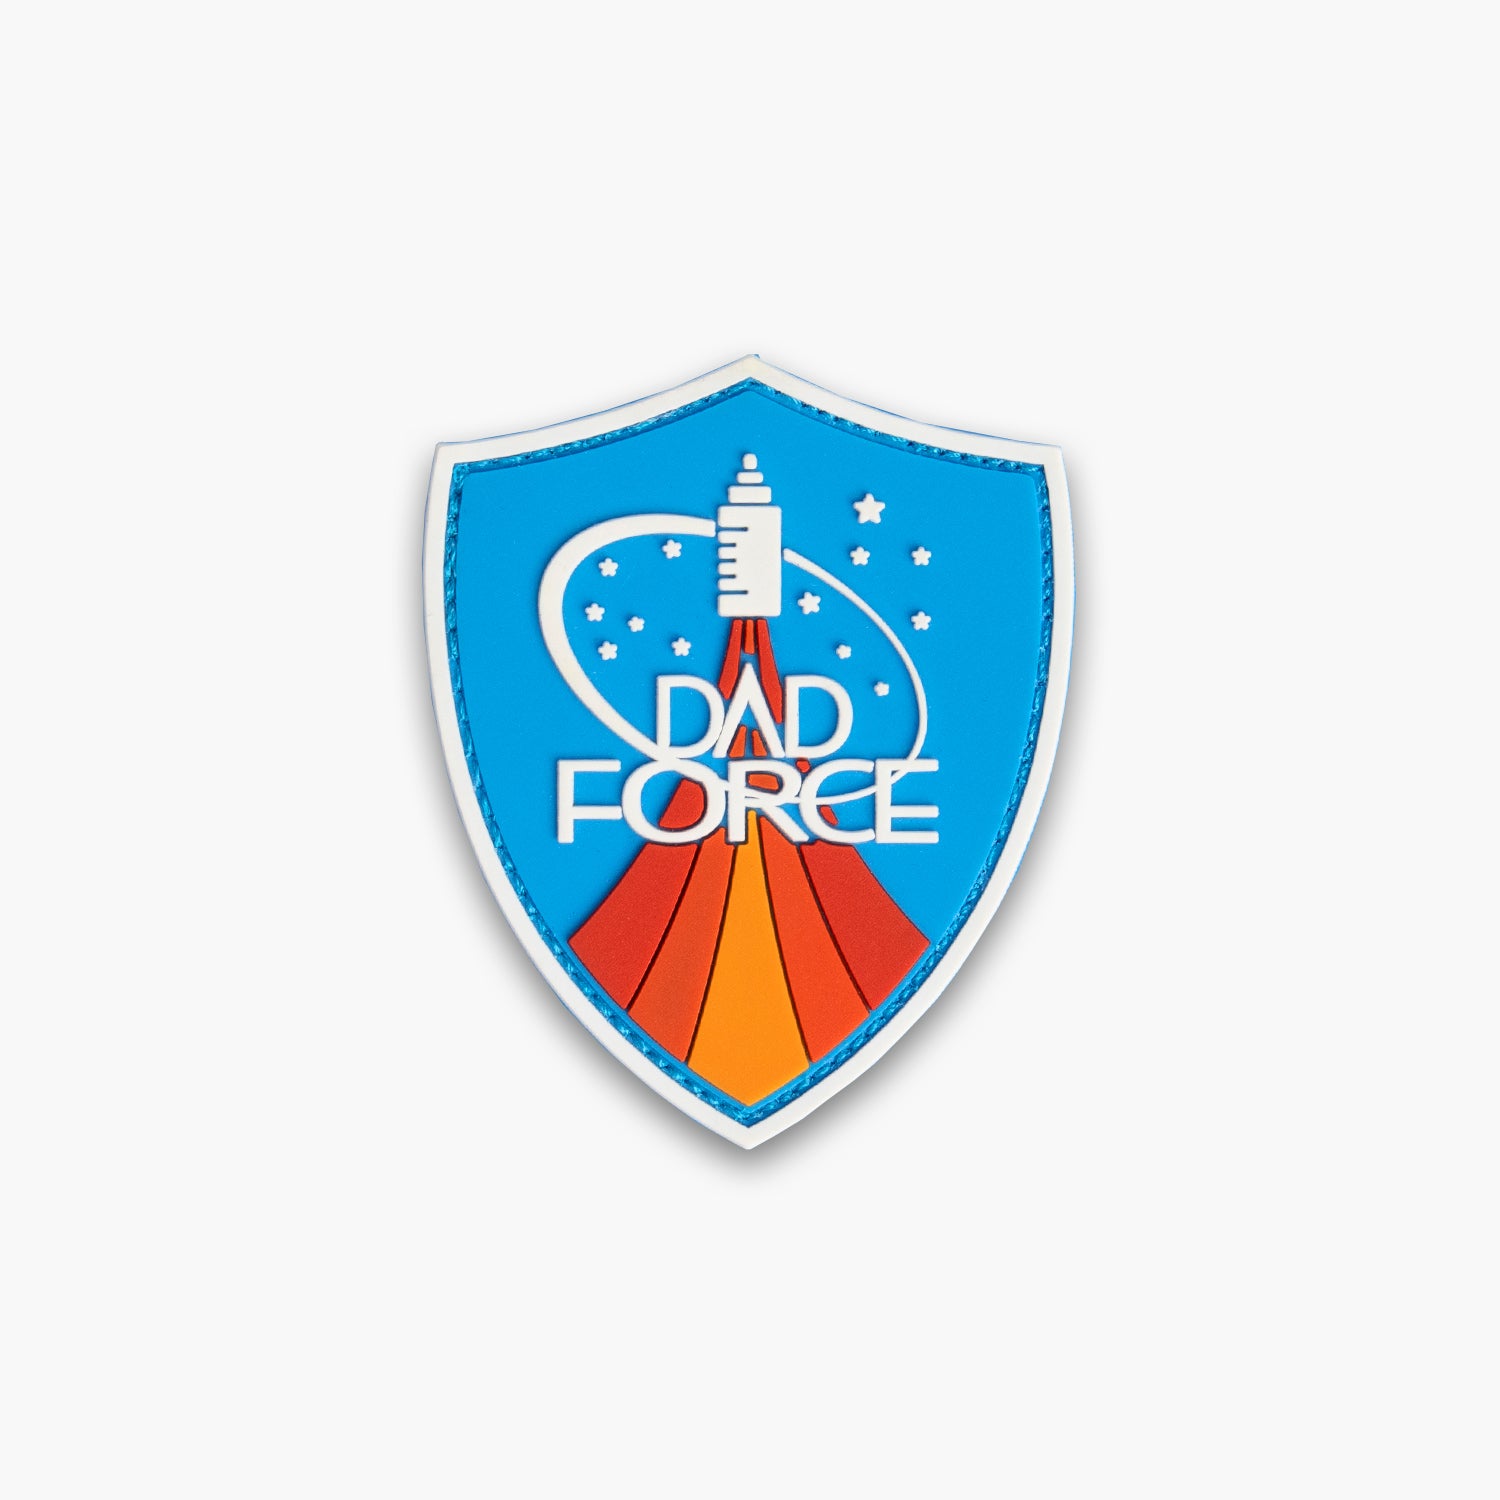 Shield style patch with rocket launching against blue sky above stylized flames. Reads Dad Force.